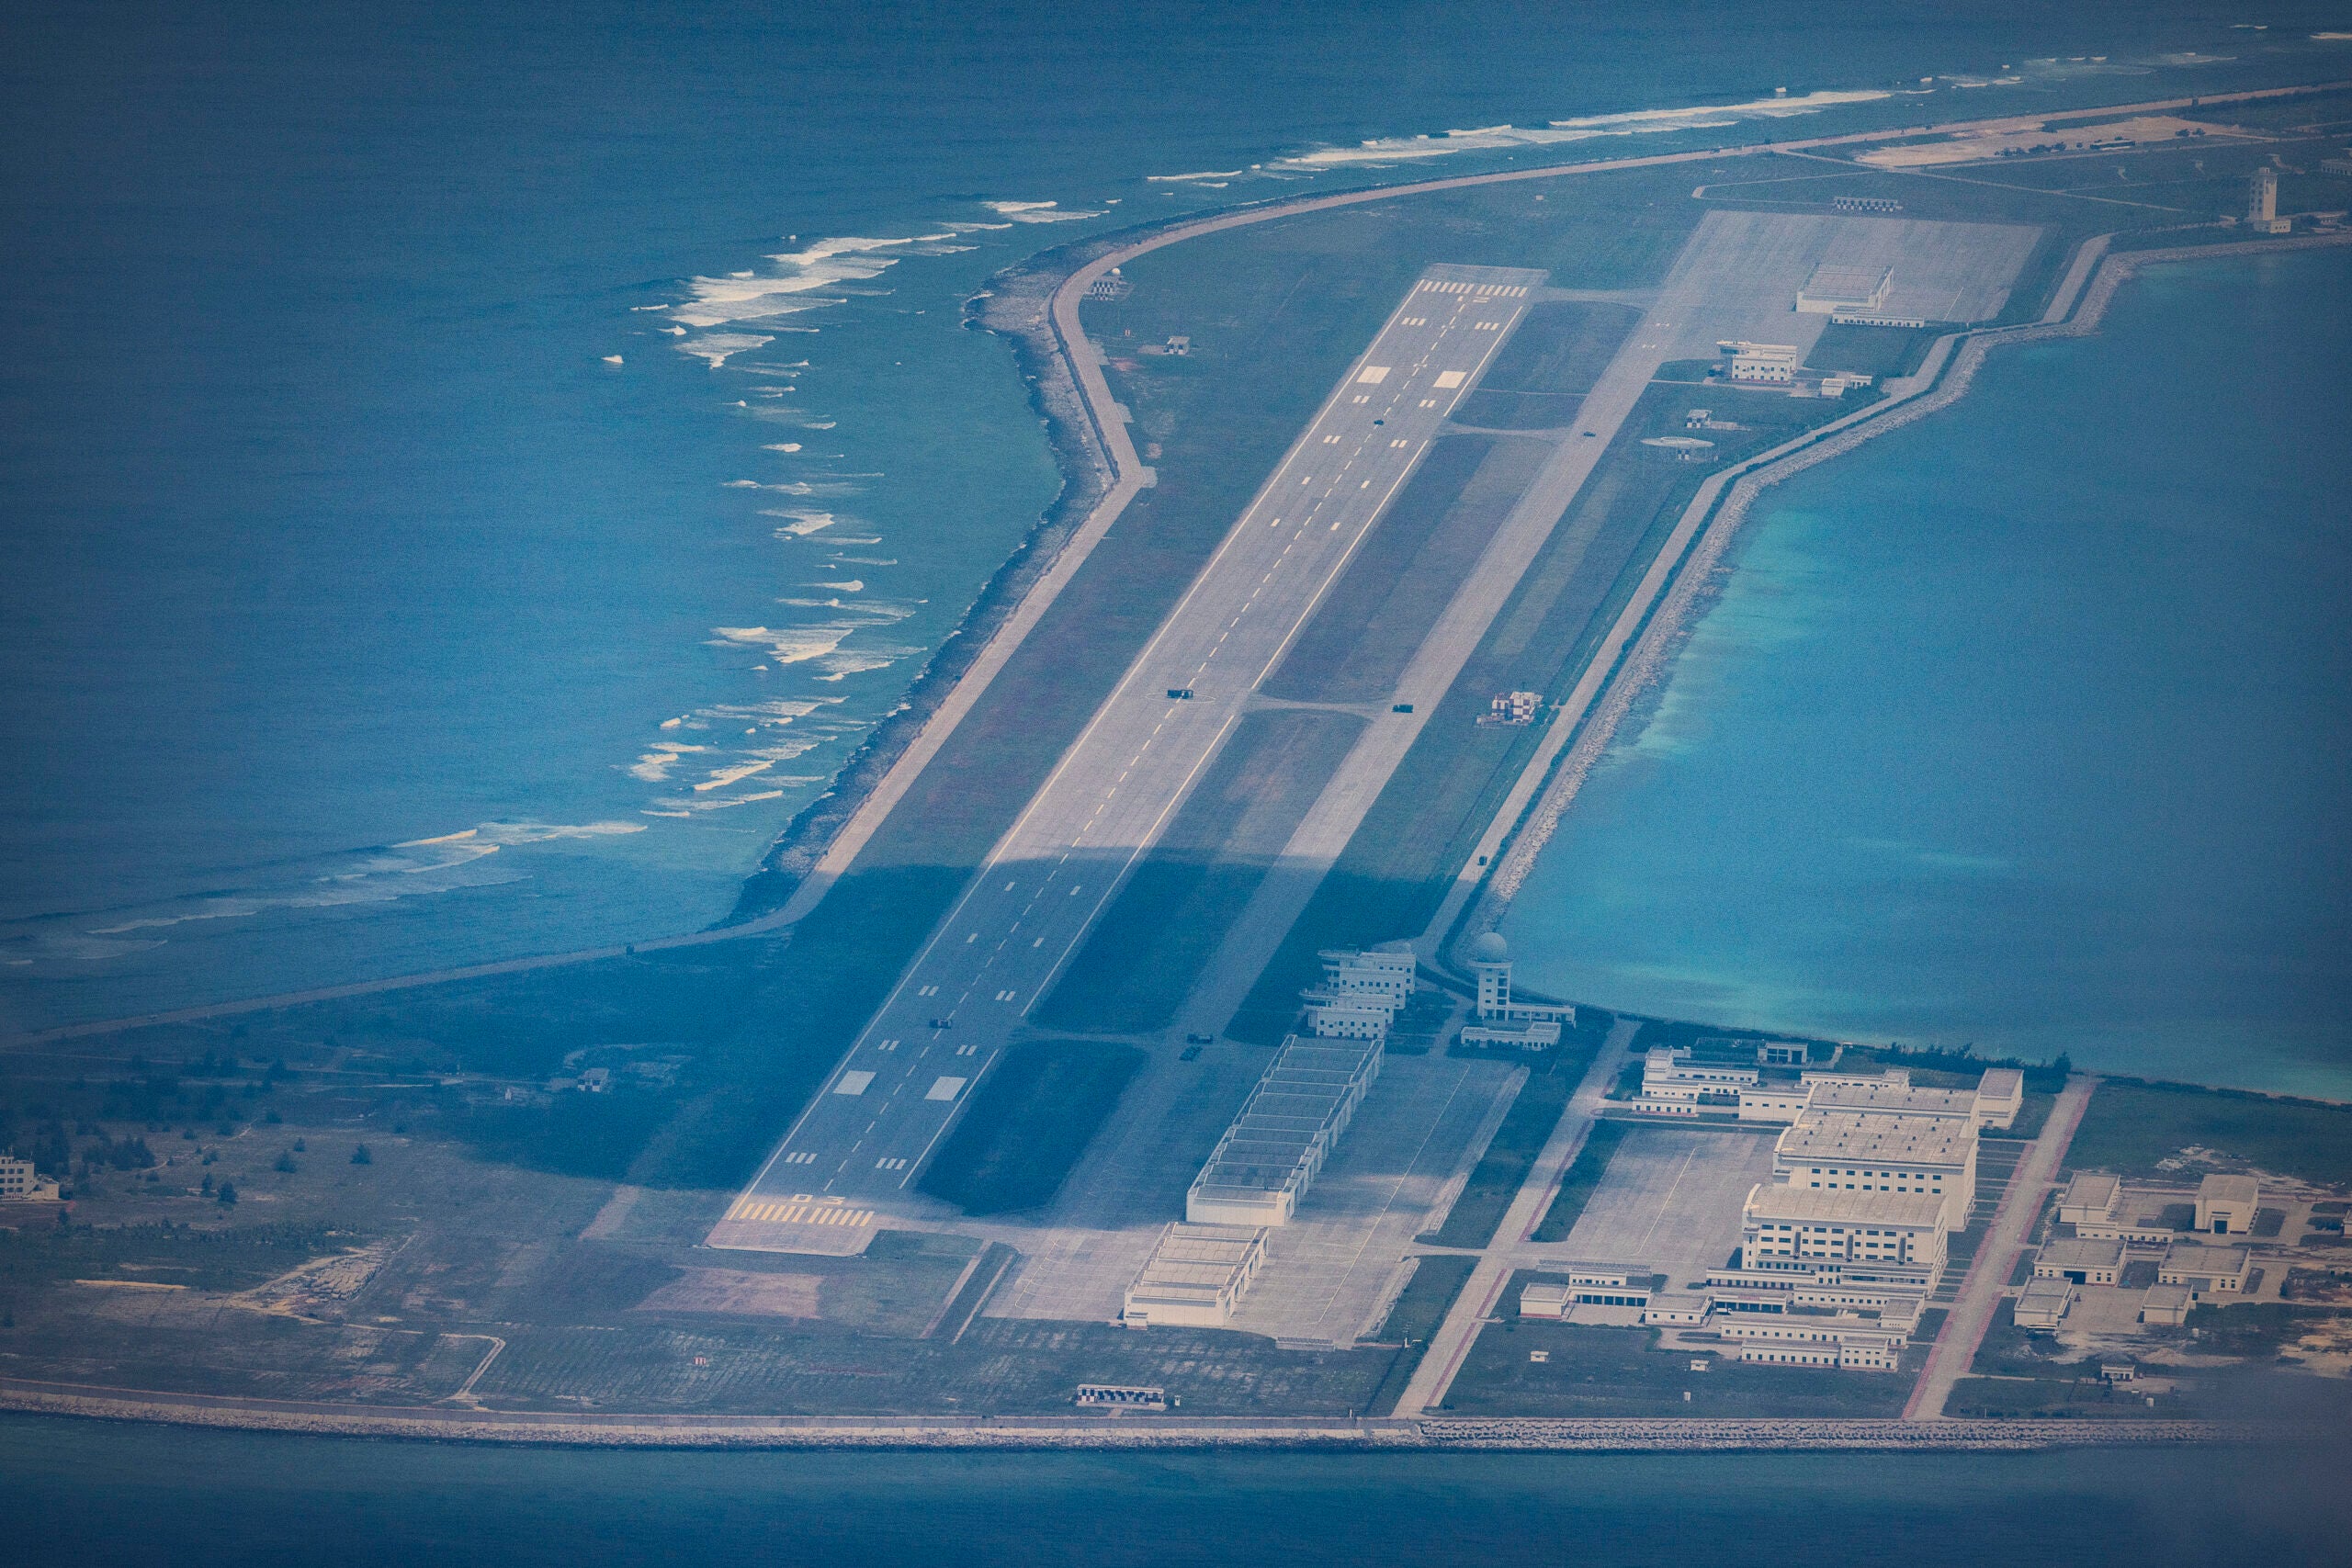 SPRATLY ISLANDS, AT SEA - OCTOBER 25: An airfield, buildings, and structures are seen on the artificial island built by China in Subi Reef on October 25, 2022 in Spratly Islands, South China Sea. China has progressively asserted its claim of ownership over disputed islands in the South China Sea by artificially increasing the size of islands, creating new islands and building ports, military outposts and airstrips. The South China sea is an important trade route and is of significant interest as geopolitical tensions remain high in the region. (Photo by Ezra Acayan/Getty Images)